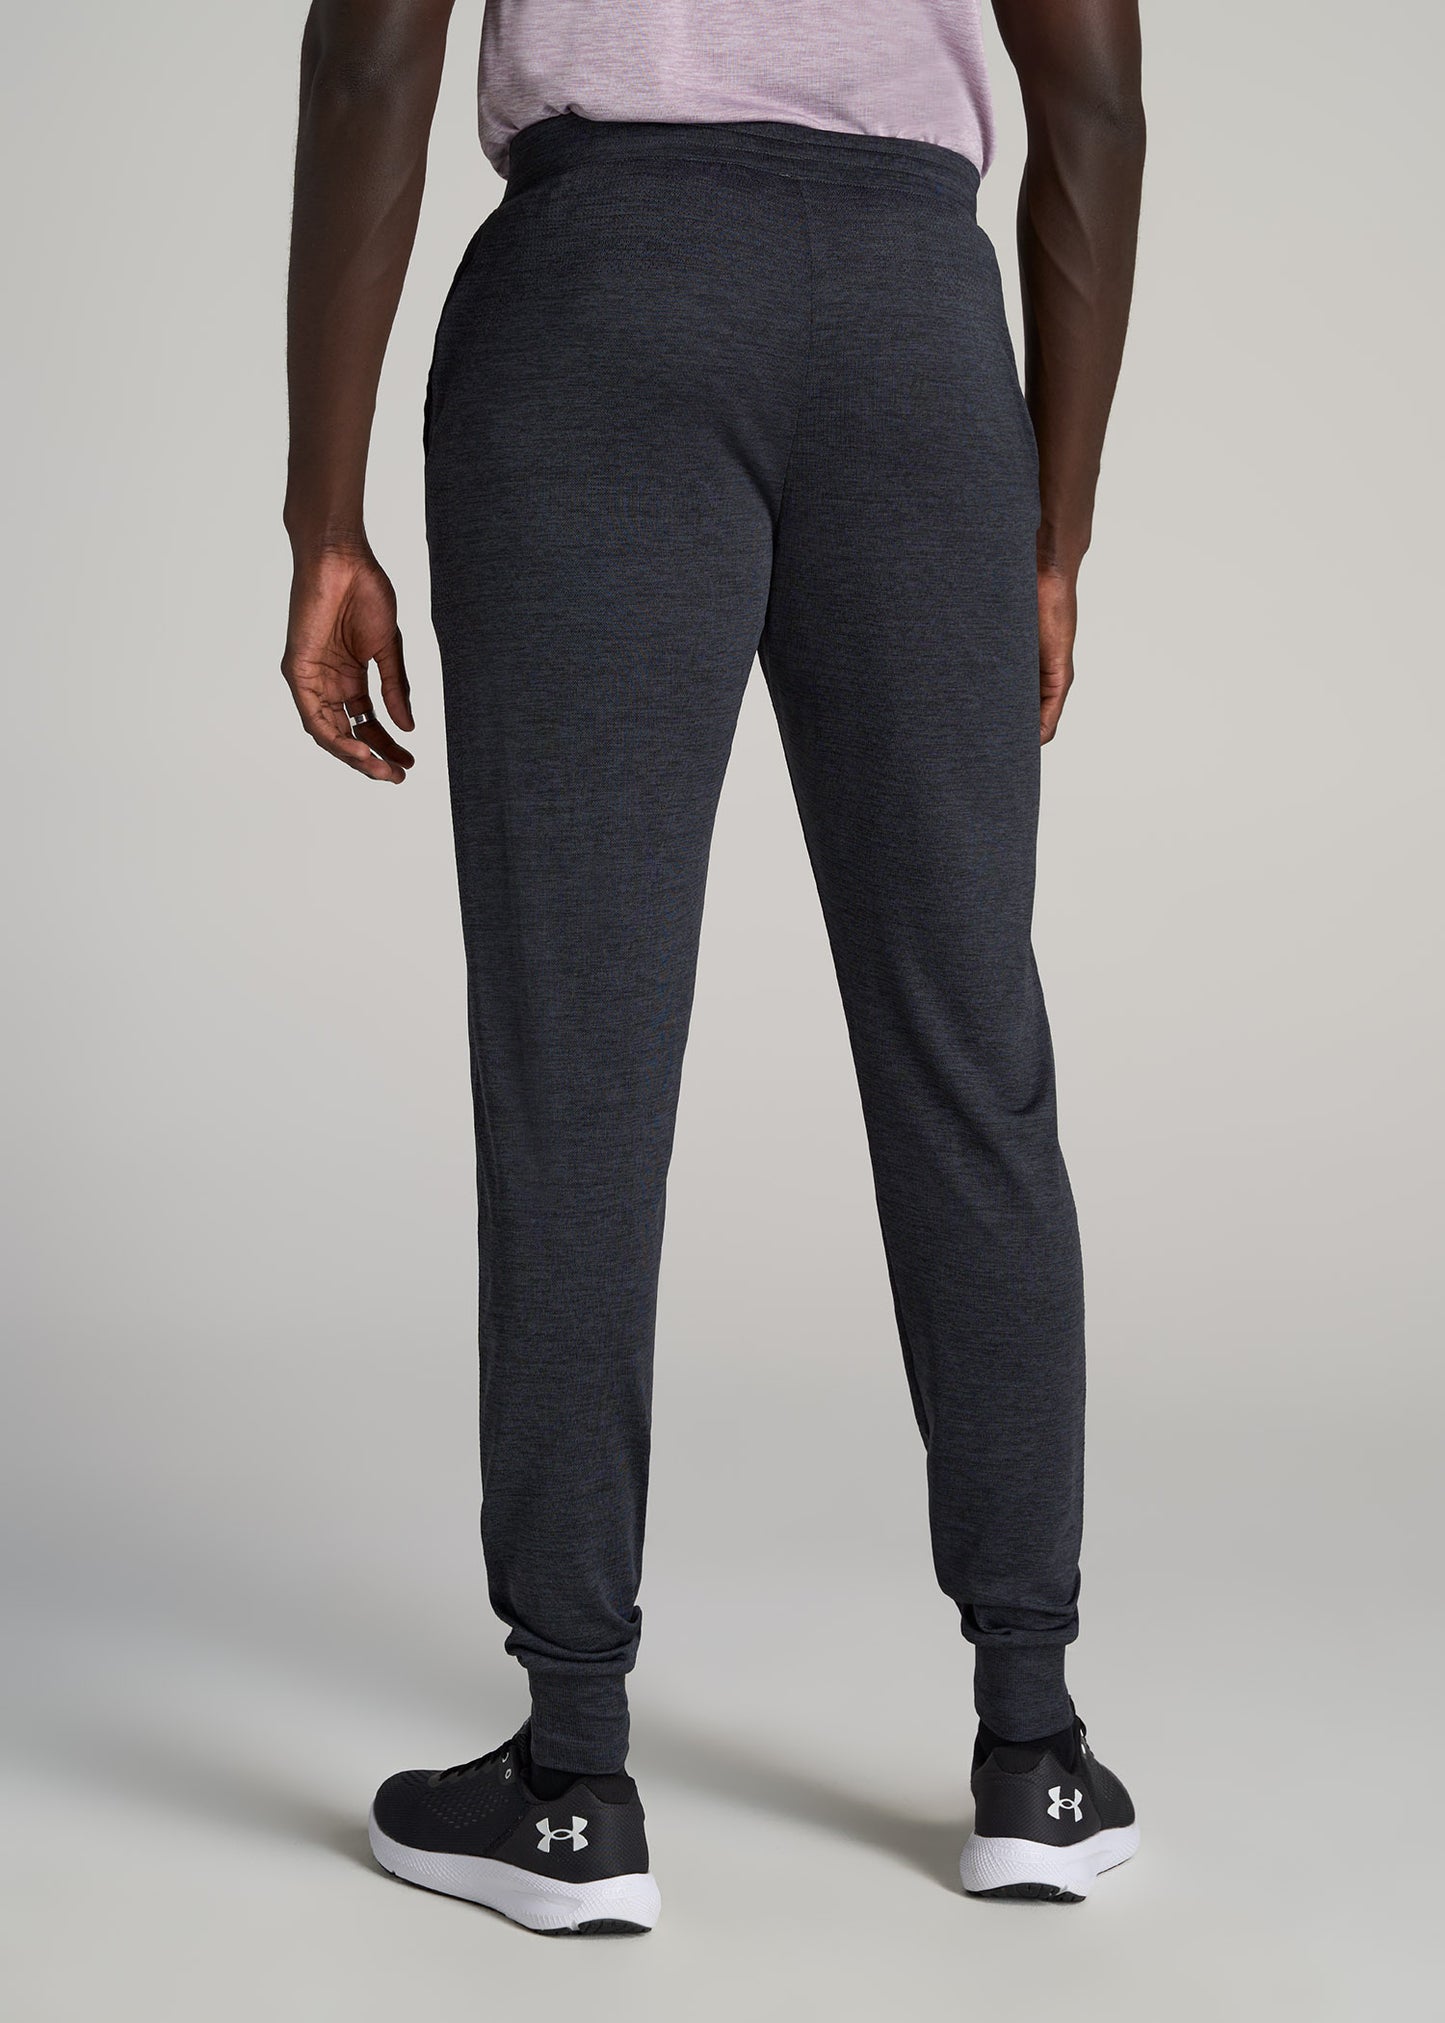 RELAXED FIT Lightweight Athletic Pants for Tall Men in Charcoal -  ShopperBoard